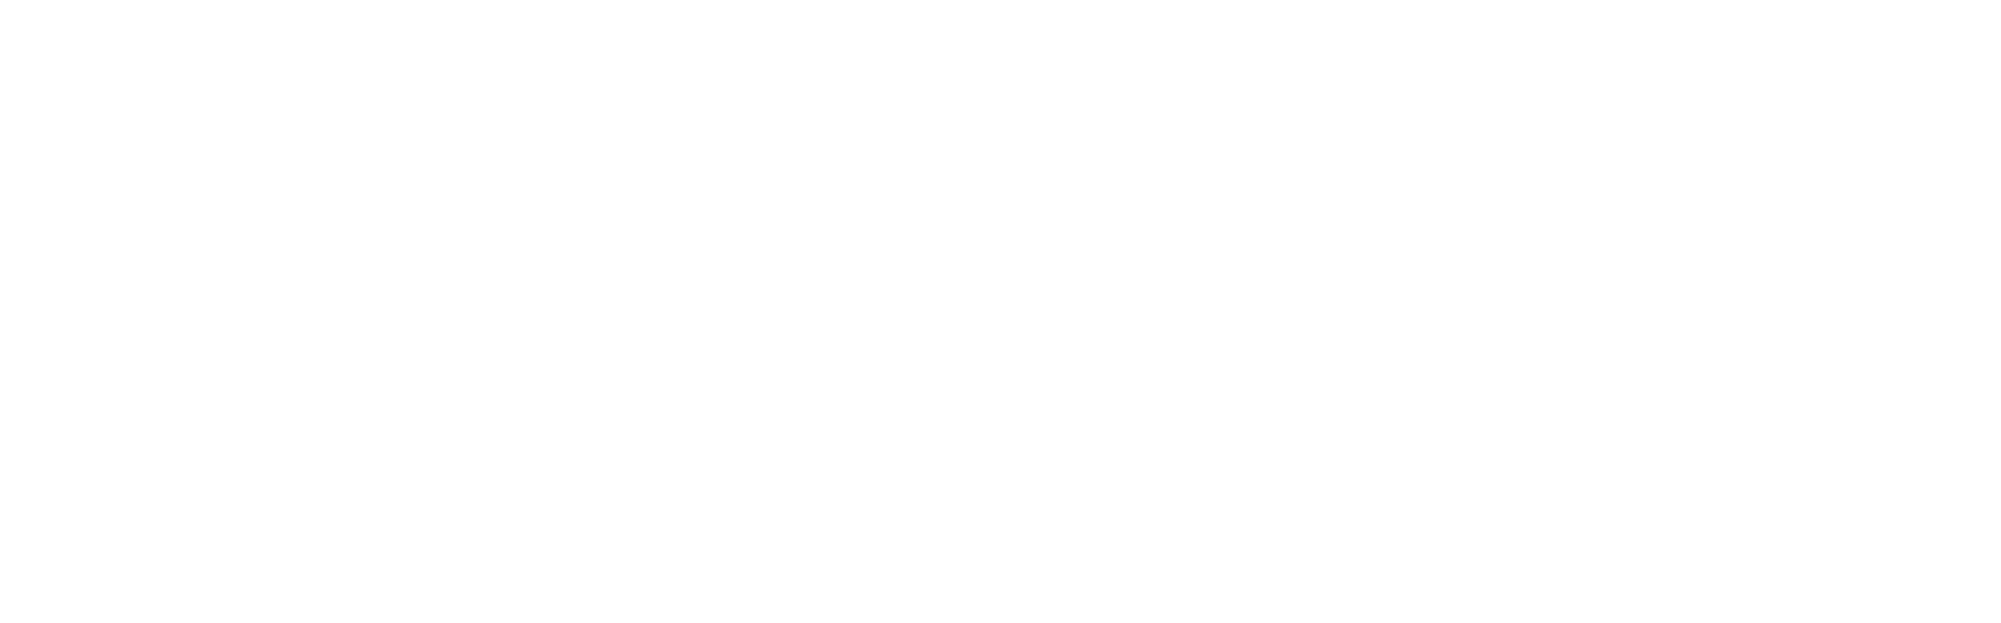 Search Toll Brothers